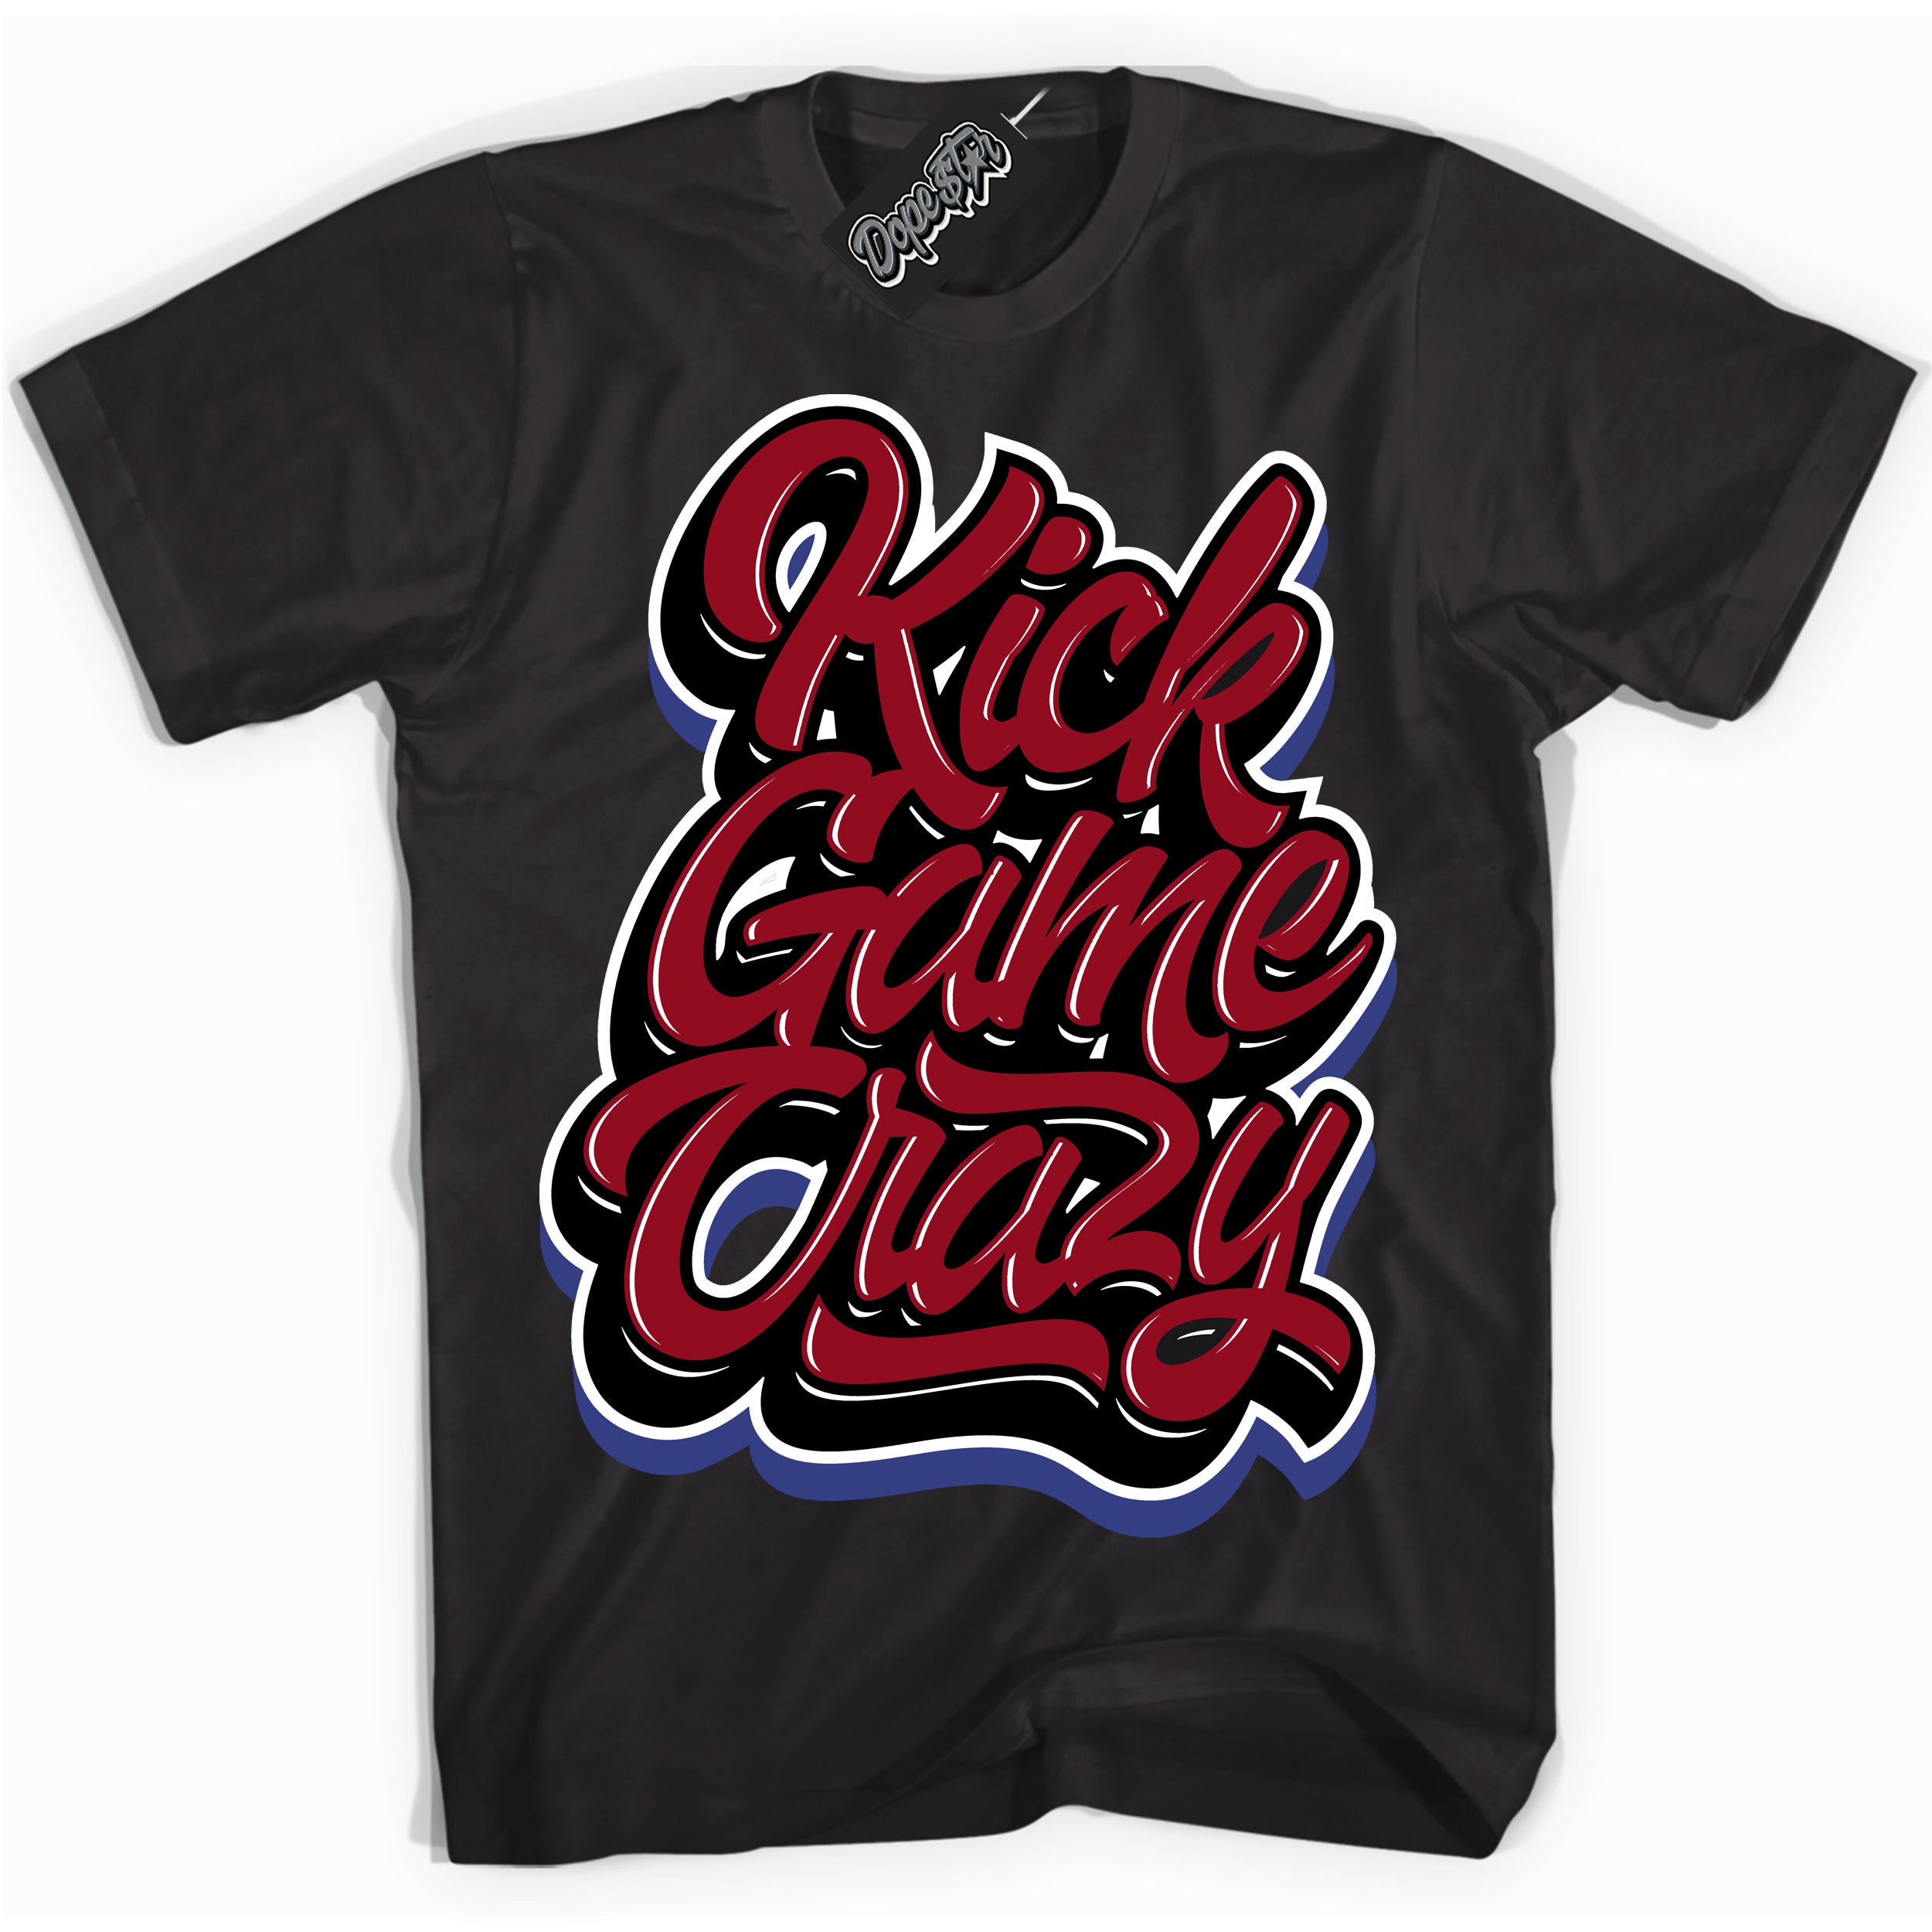 Cool Black Shirt with “ Kick Game Crazy ” design that perfectly matches Playoffs 8s Sneakers.